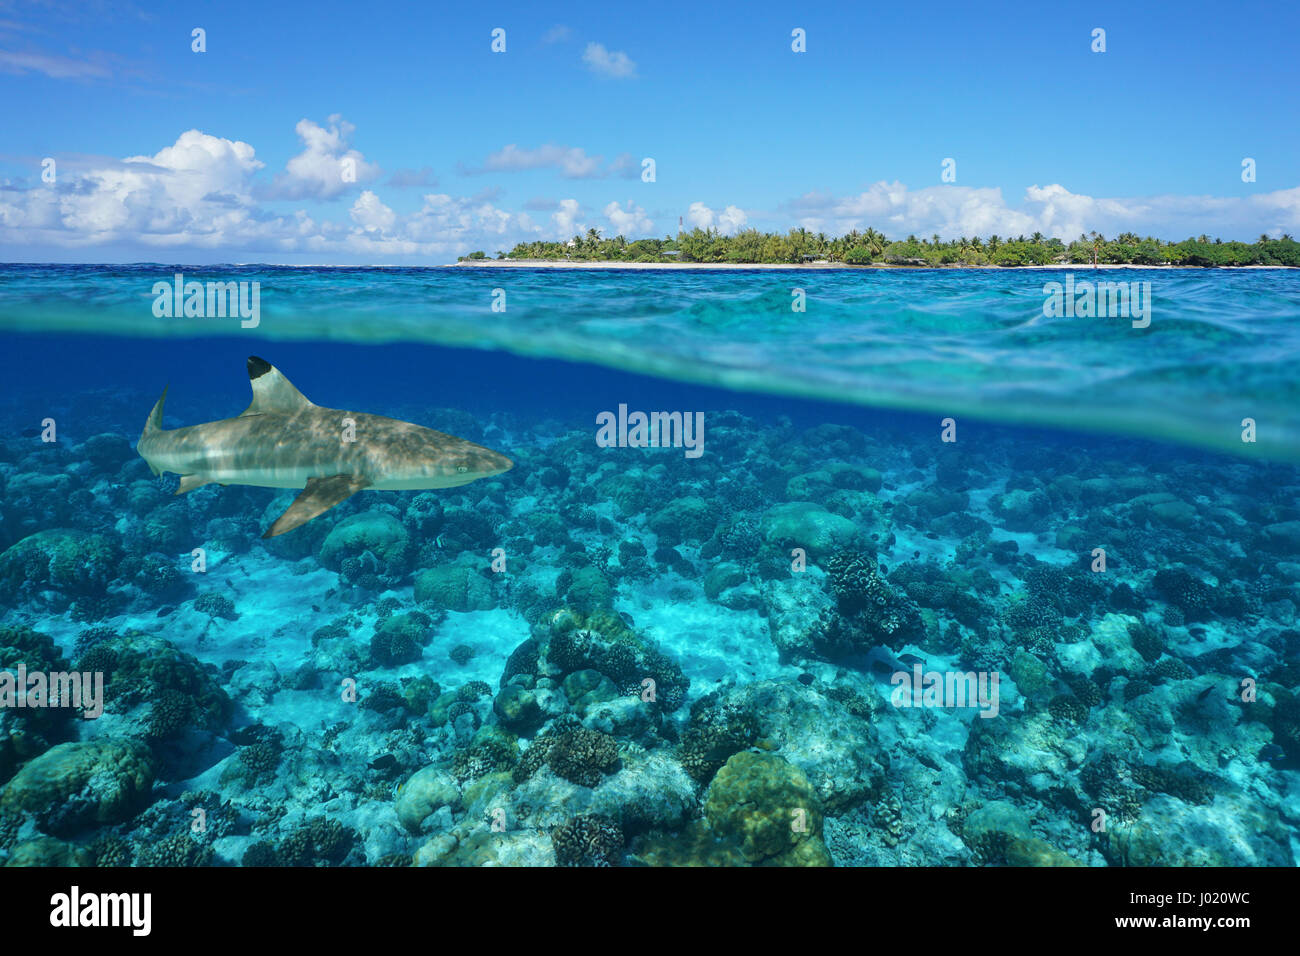 Over and under sea surface with an island and a shark underwater, Tiputa pass, Rangiroa atoll, Tuamotu, French Polynesia, Pacific ocean Stock Photo